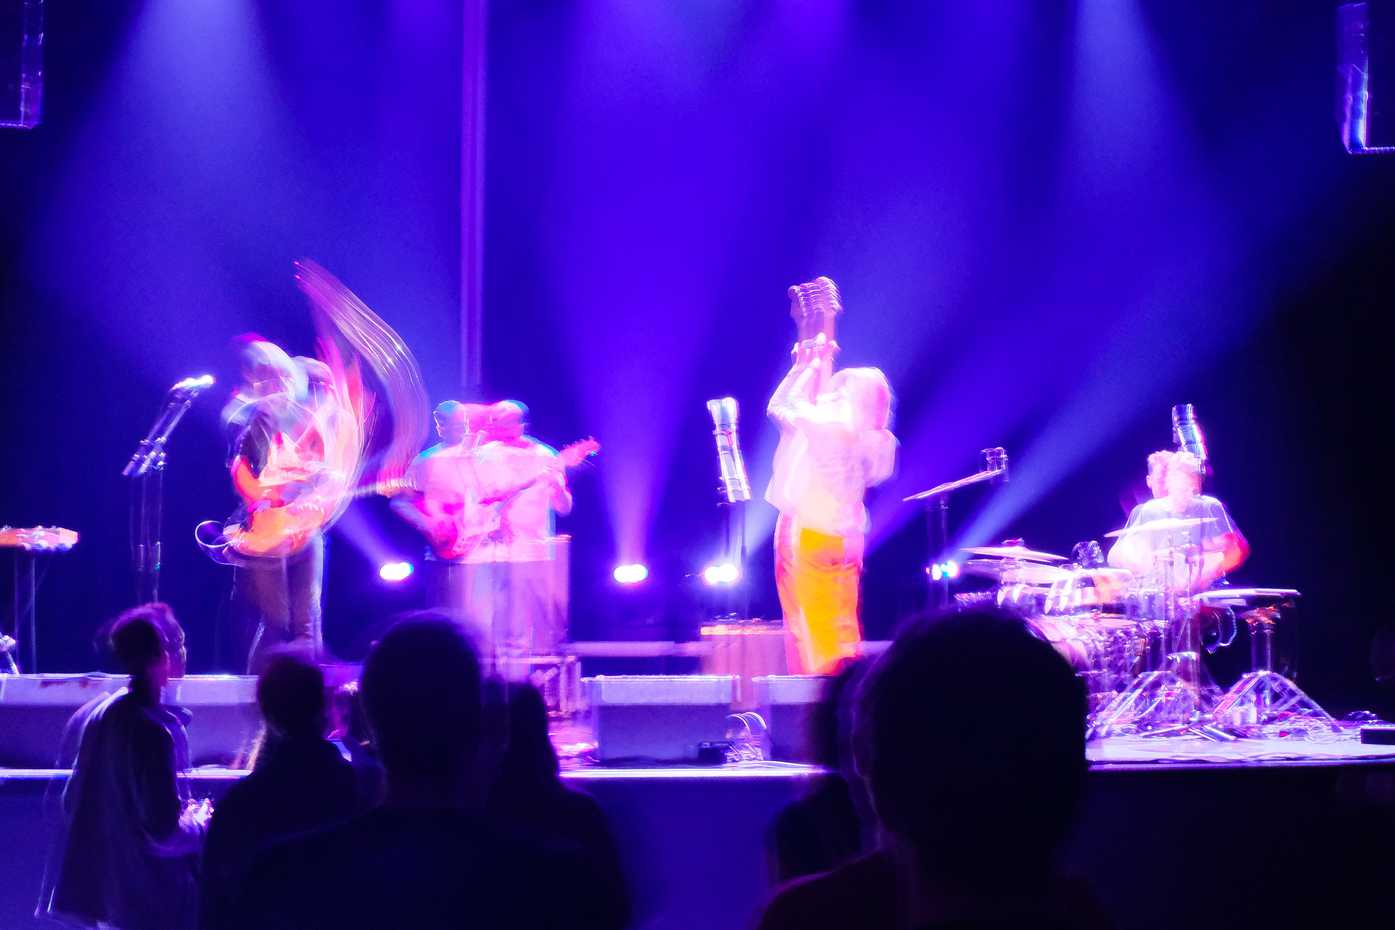 Blurry, colorful photo taken at a show